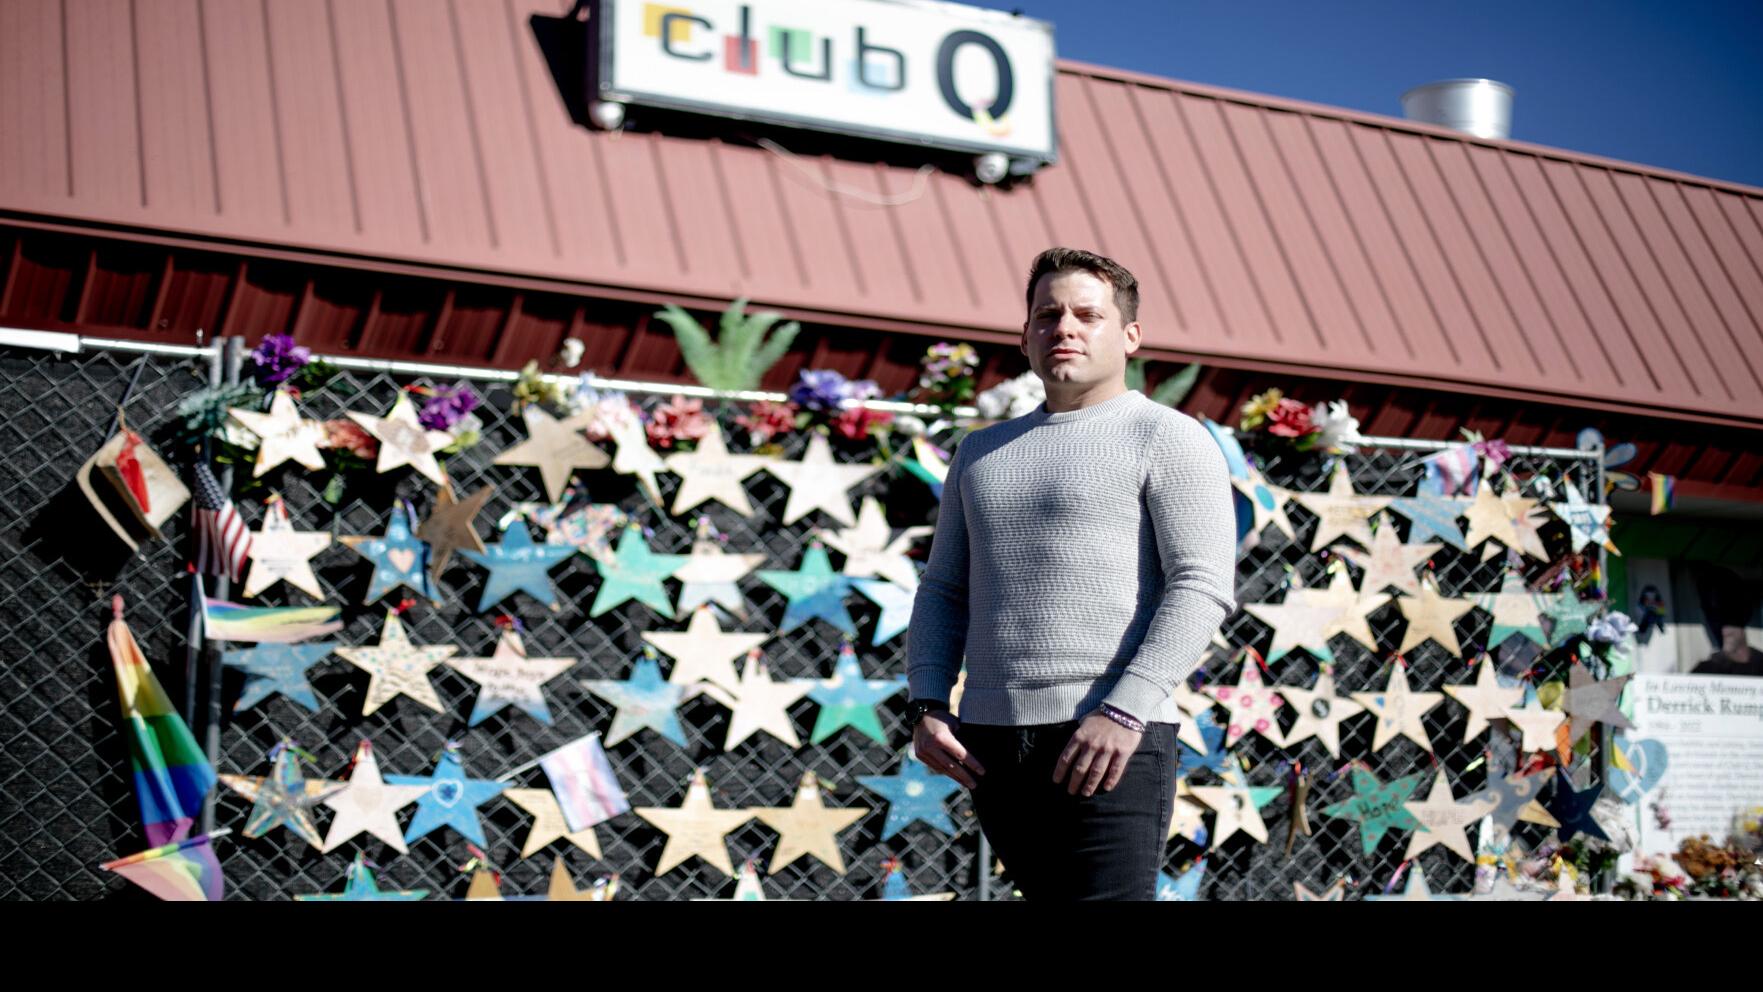 After Club Q attack, LGBT venues grapple with safety concerns